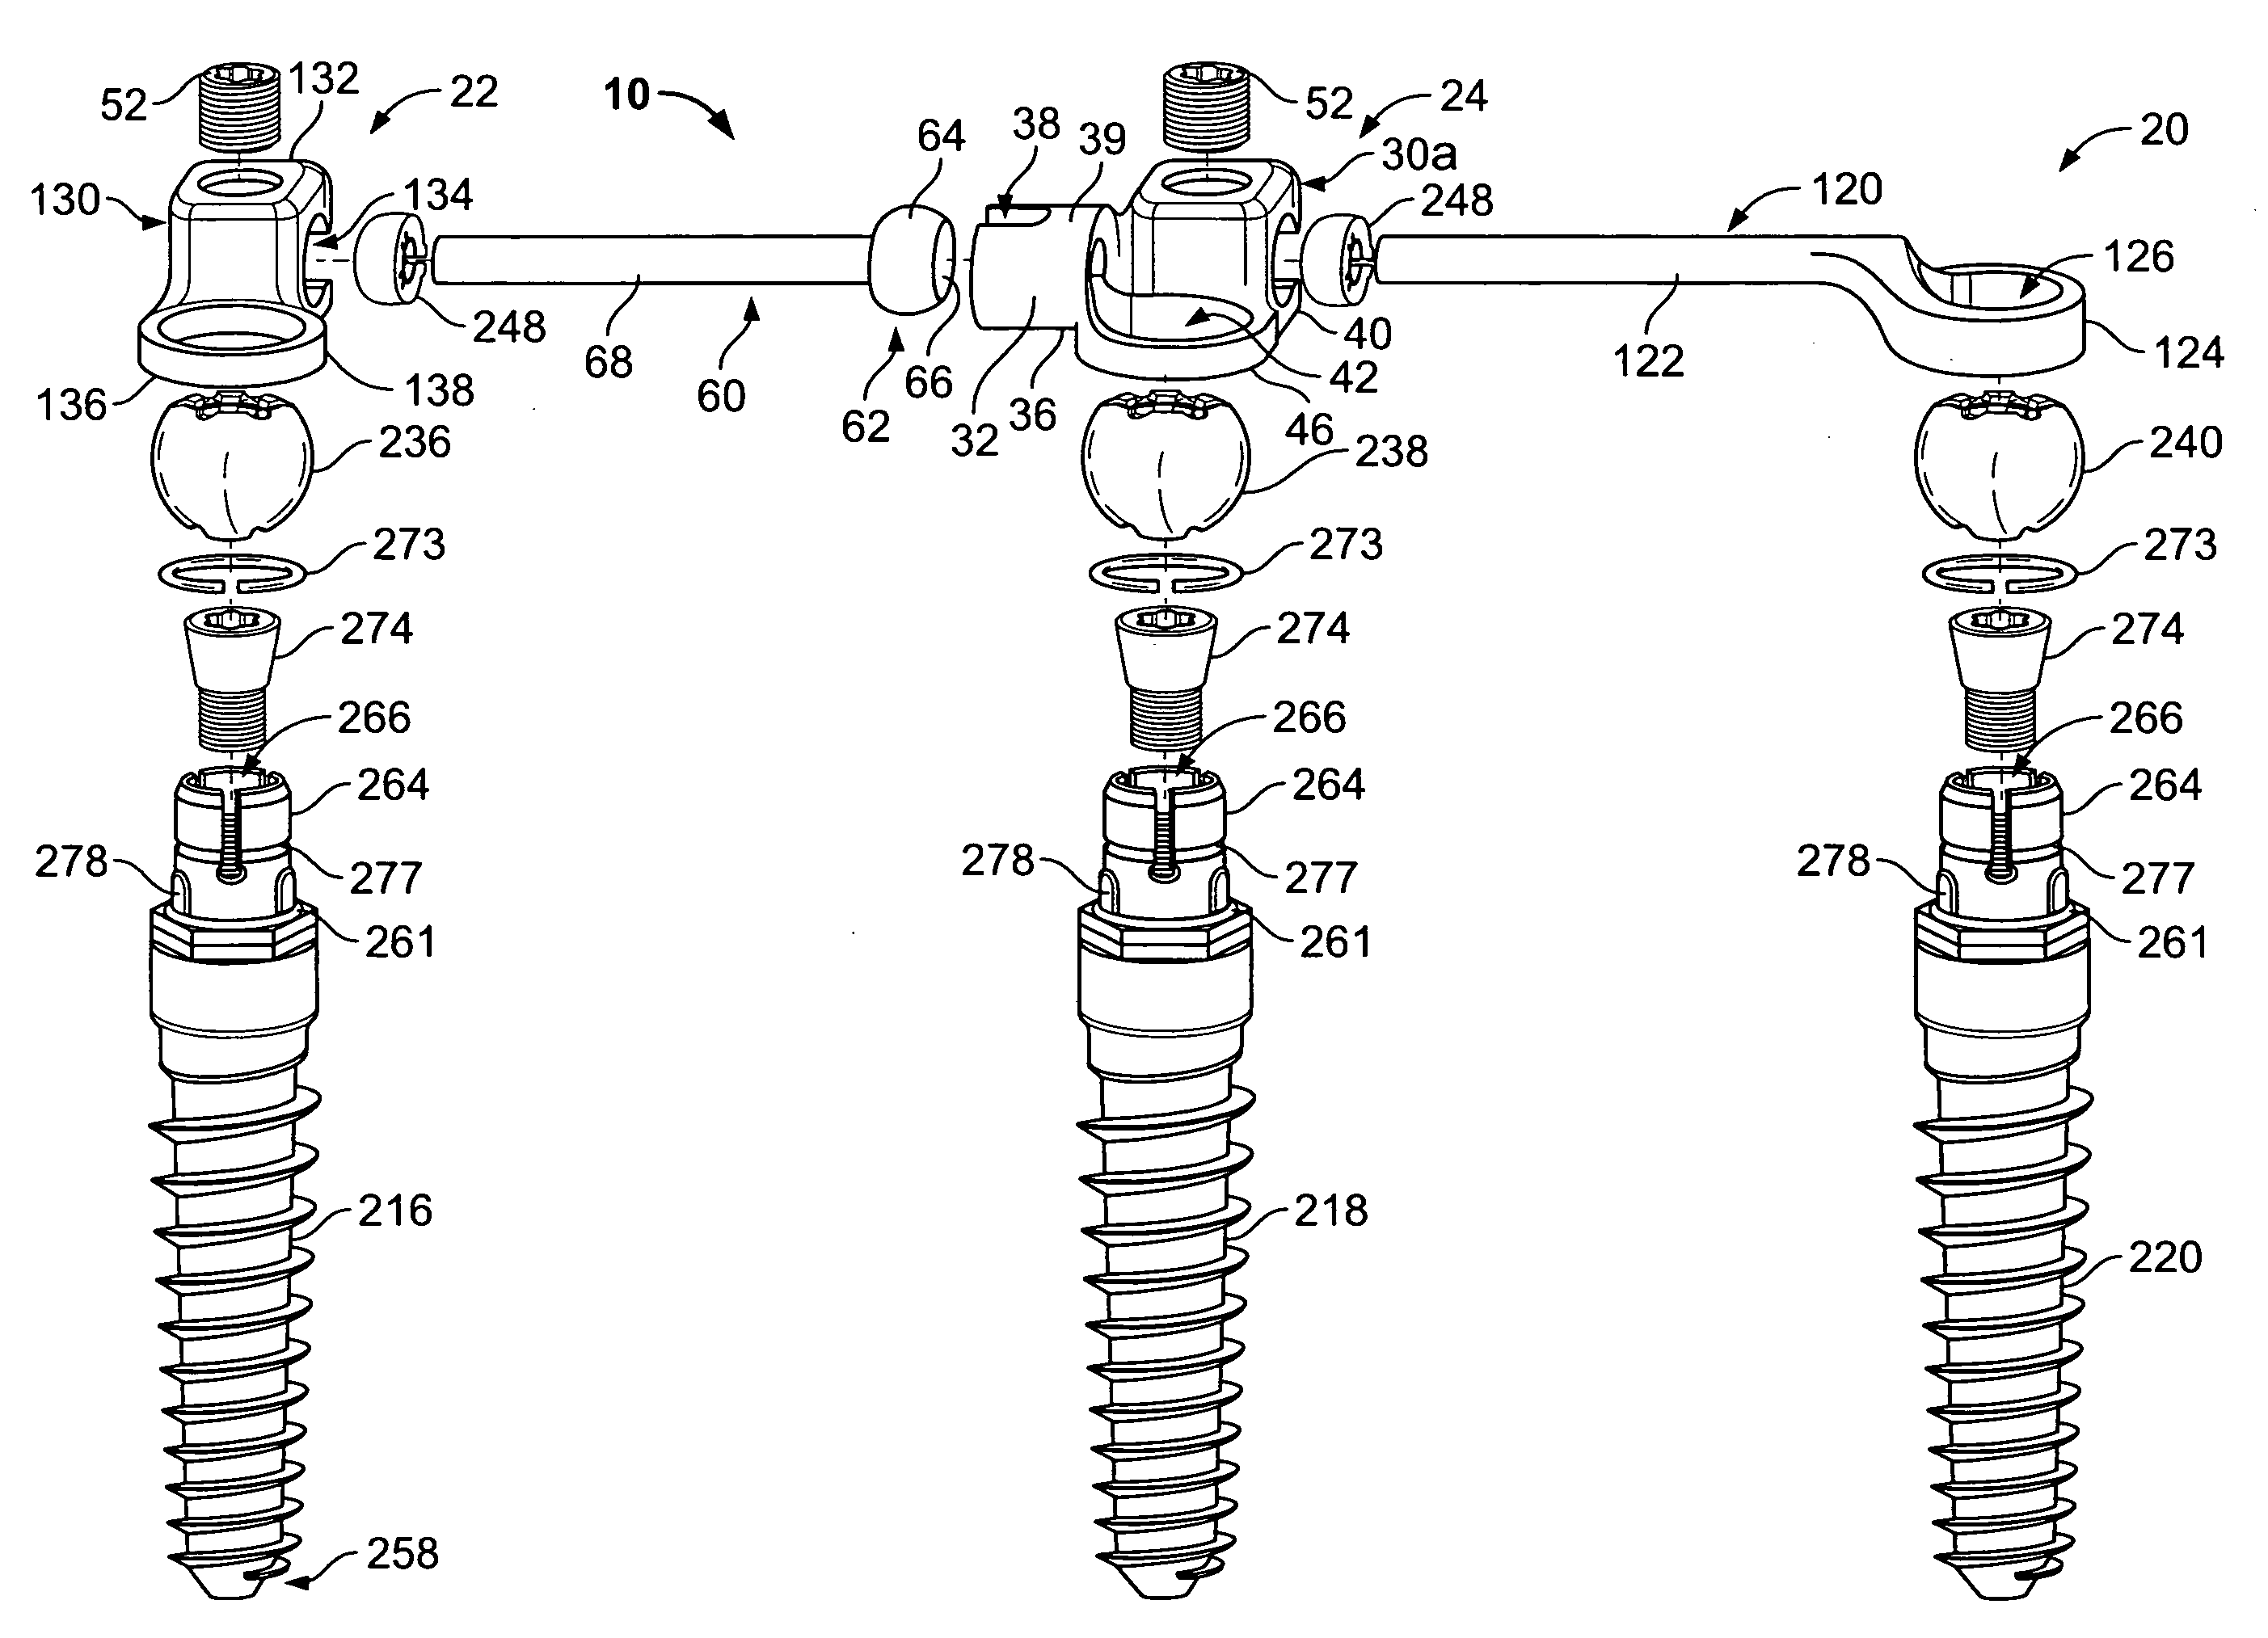 Multi-level spinal stabilization system